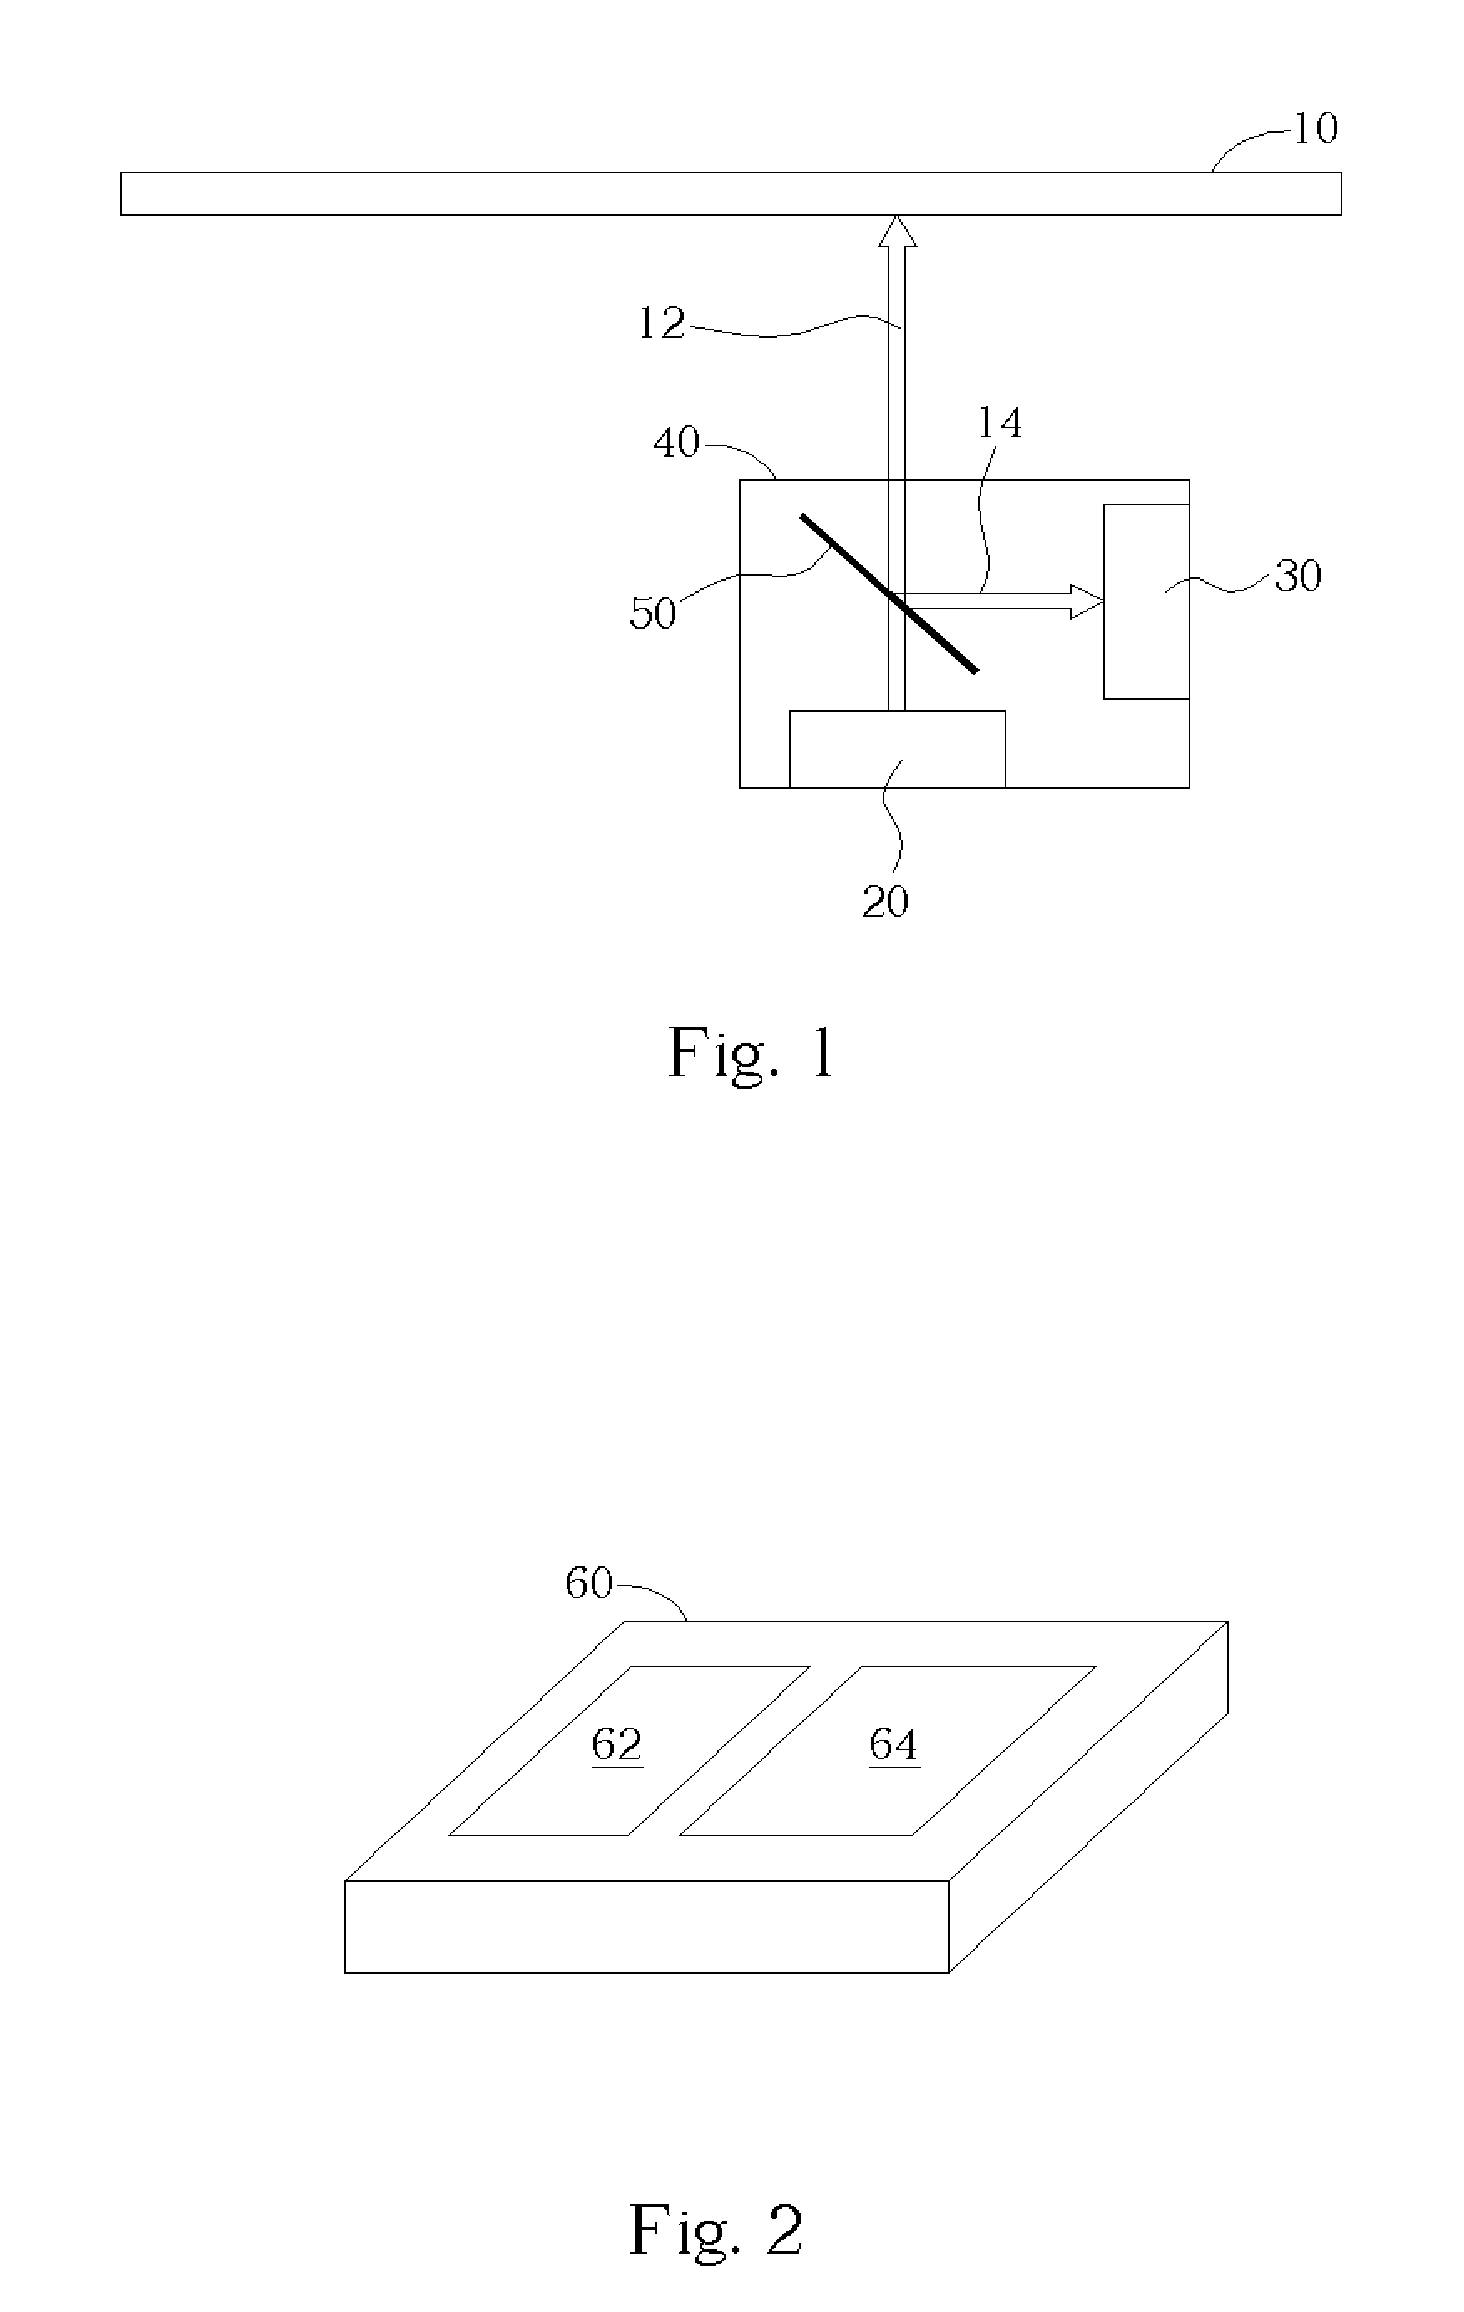 Device capable of detecting vibration/shock